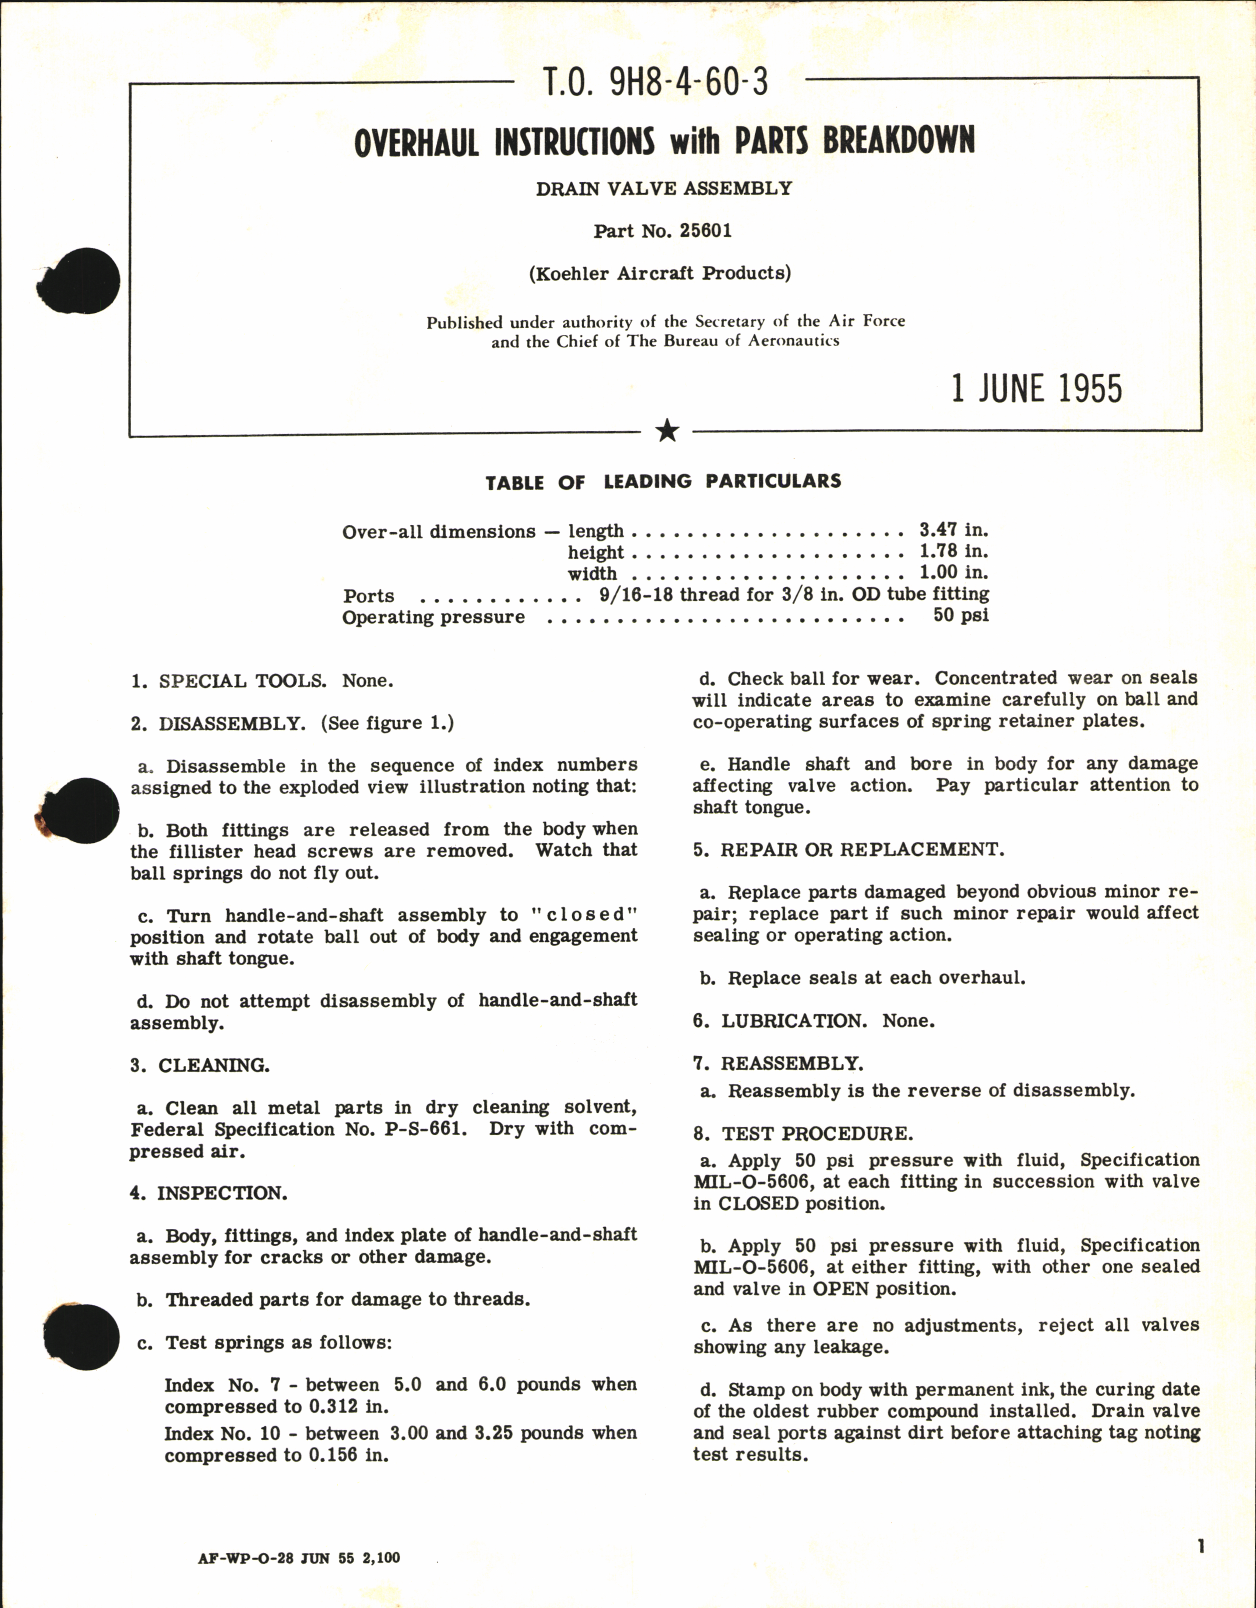 Sample page 1 from AirCorps Library document: Overhaul Instructions with Parts Breakdown for Drain Valve Assembly Part No. 25601